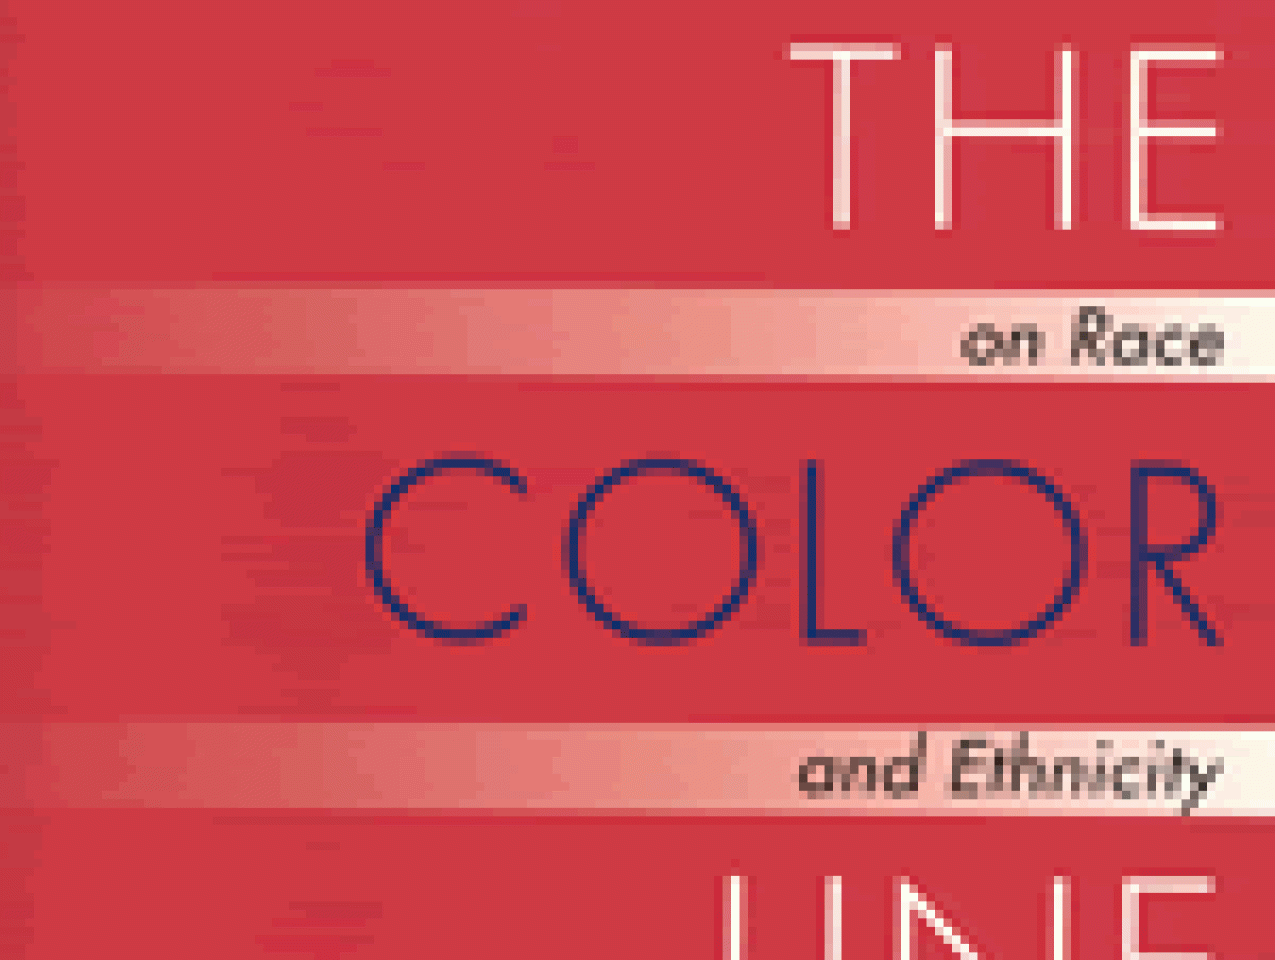 Beyond the Color Line: New Perspectives on Race and Ethnicity in America